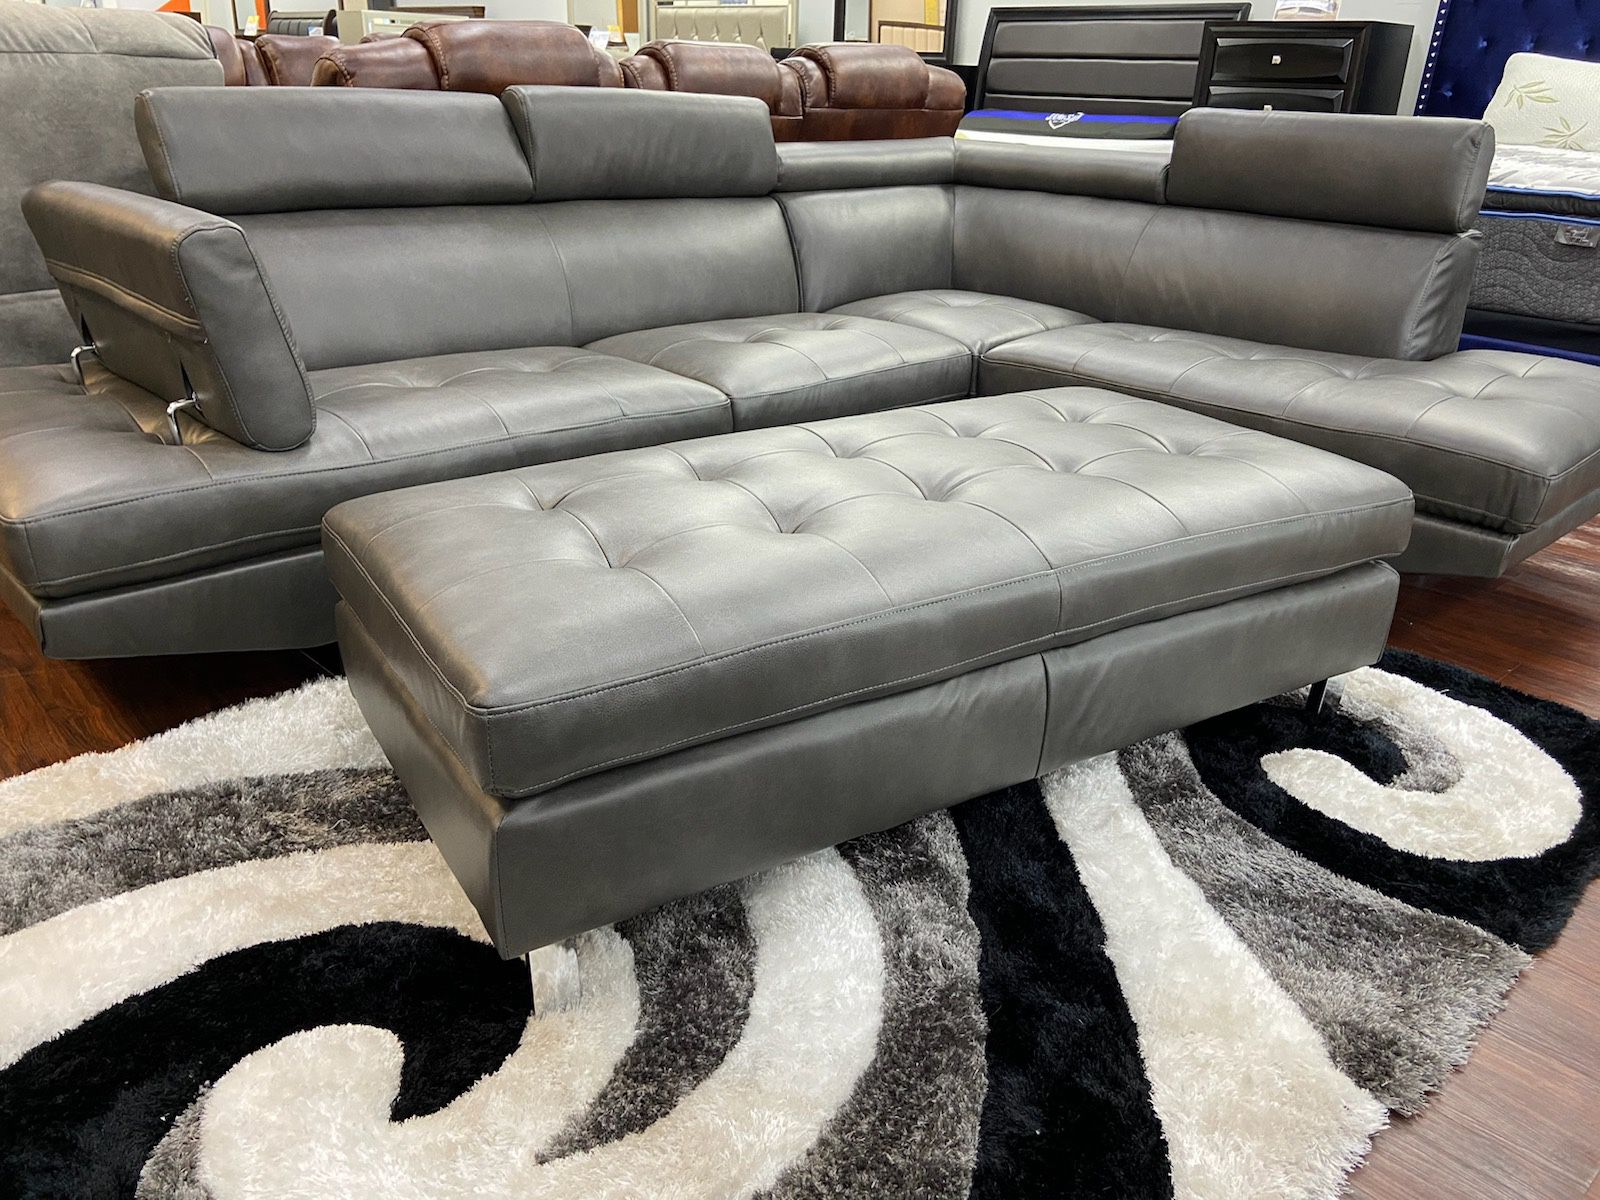 BEAUTIFUL GREY IBIZA SECTIONAL SOFA!$899!*SAME DAY DELIVERY*NO CREDIT NEEDED*EASY FINANCING*HUGE SALE*